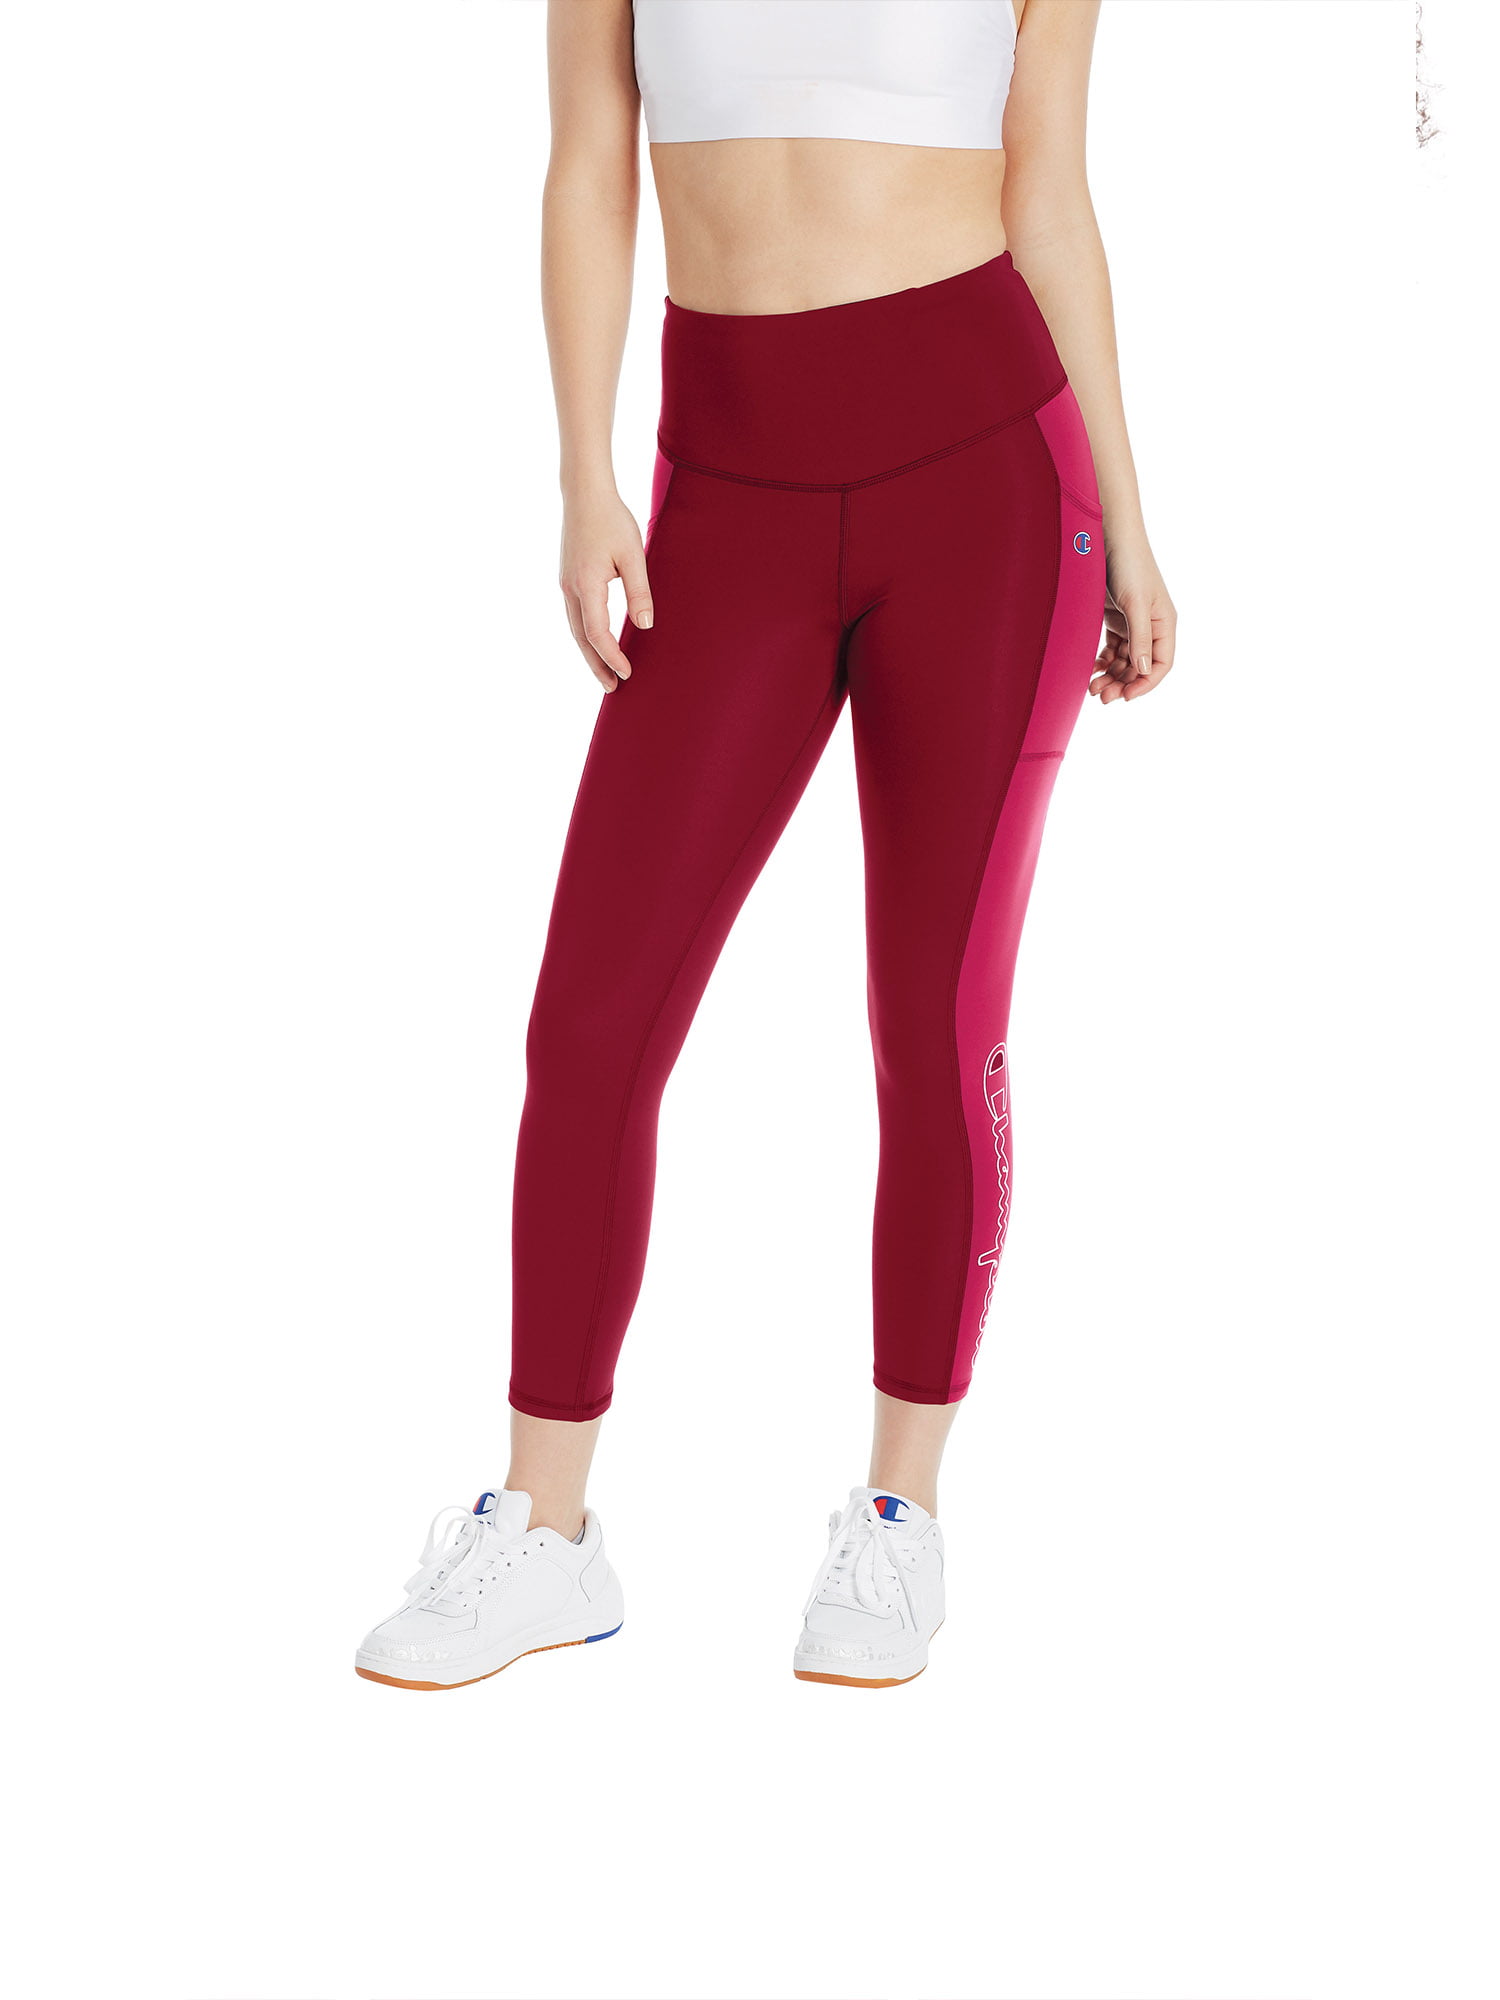 Champion Women's 7/8 Leggings Authentic Double Dry Stretch 25-inch inseam pocket 